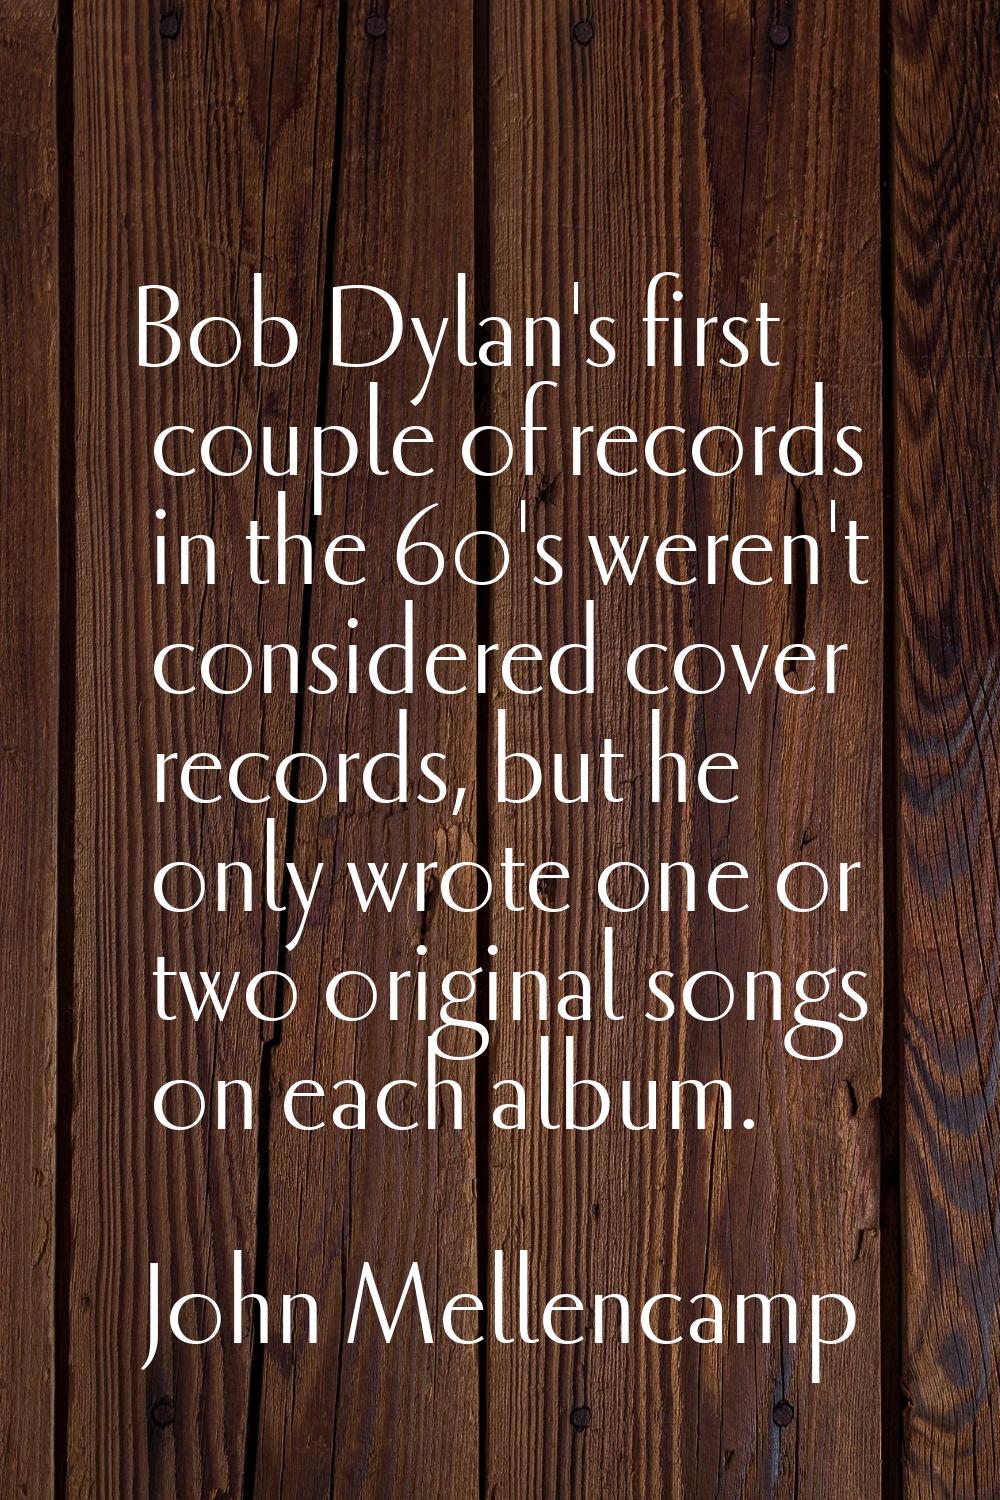 Bob Dylan's first couple of records in the 60's weren't considered cover records, but he only wrote